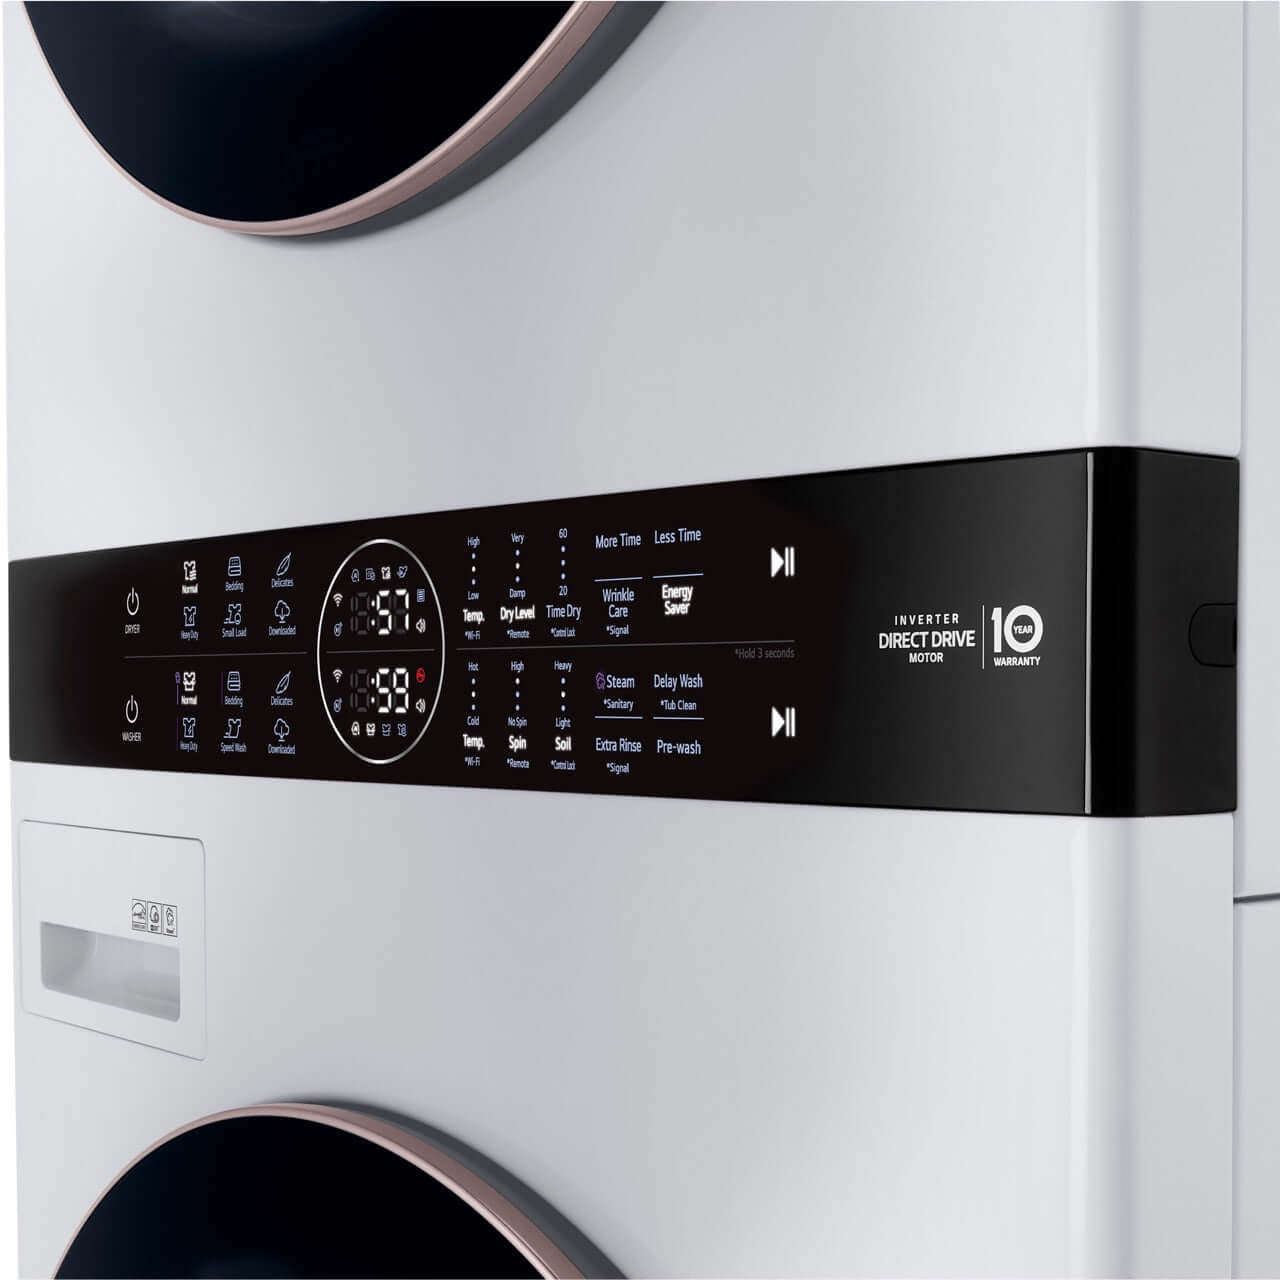 LG 4.5 -Cu. Ft. Washer and 7.4-Cu. Ft. Electric Dryer Single Unit Front Load WashTower with Center Control (WKE100HWA)